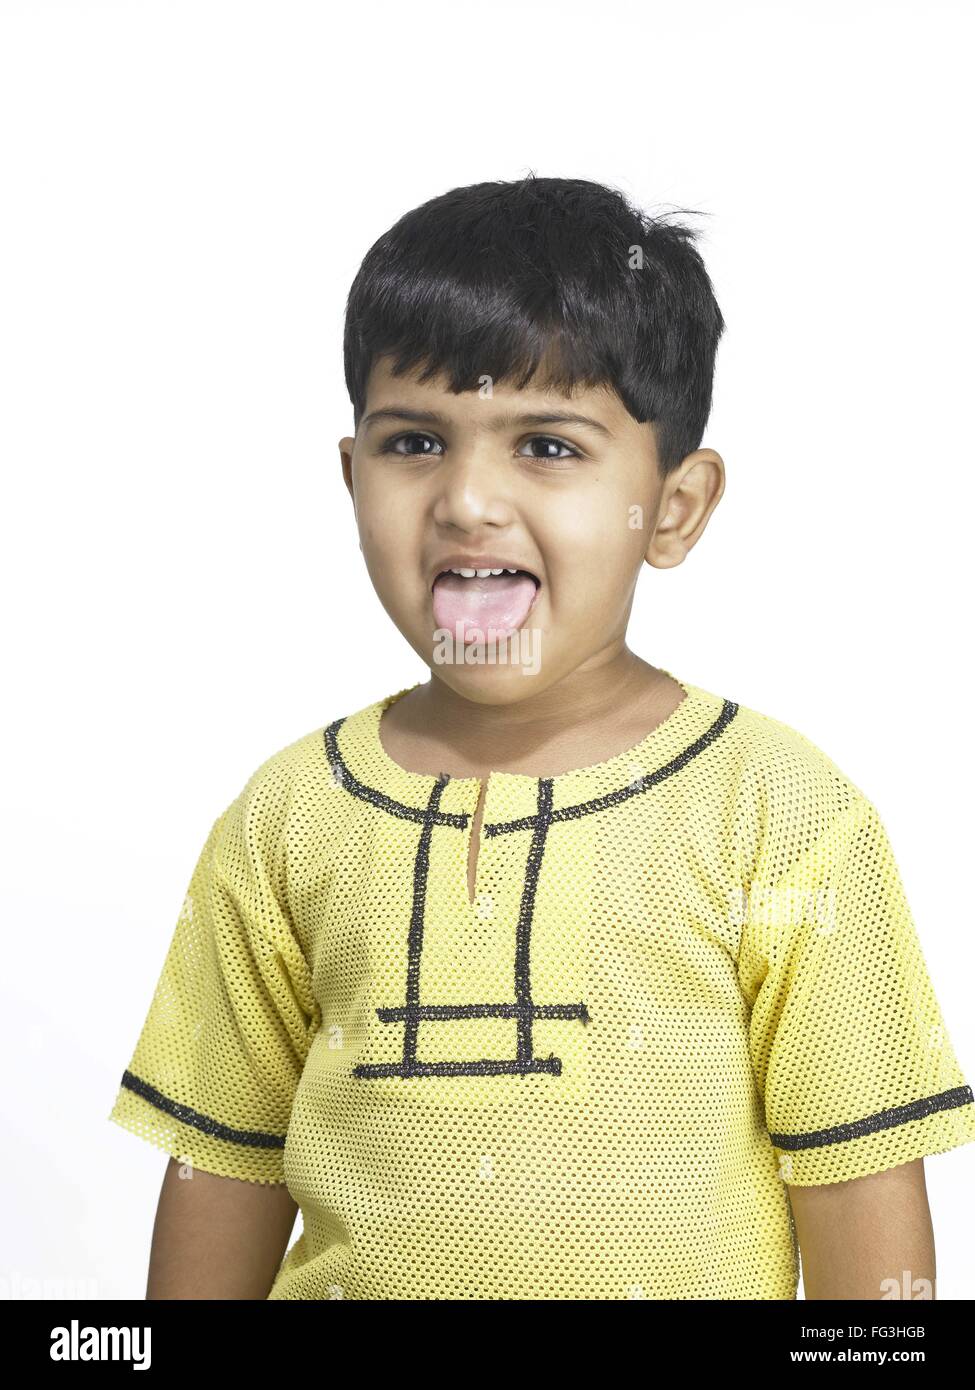 South Asian Indian boy making funny face in nursery school MR Stock Photo -  Alamy